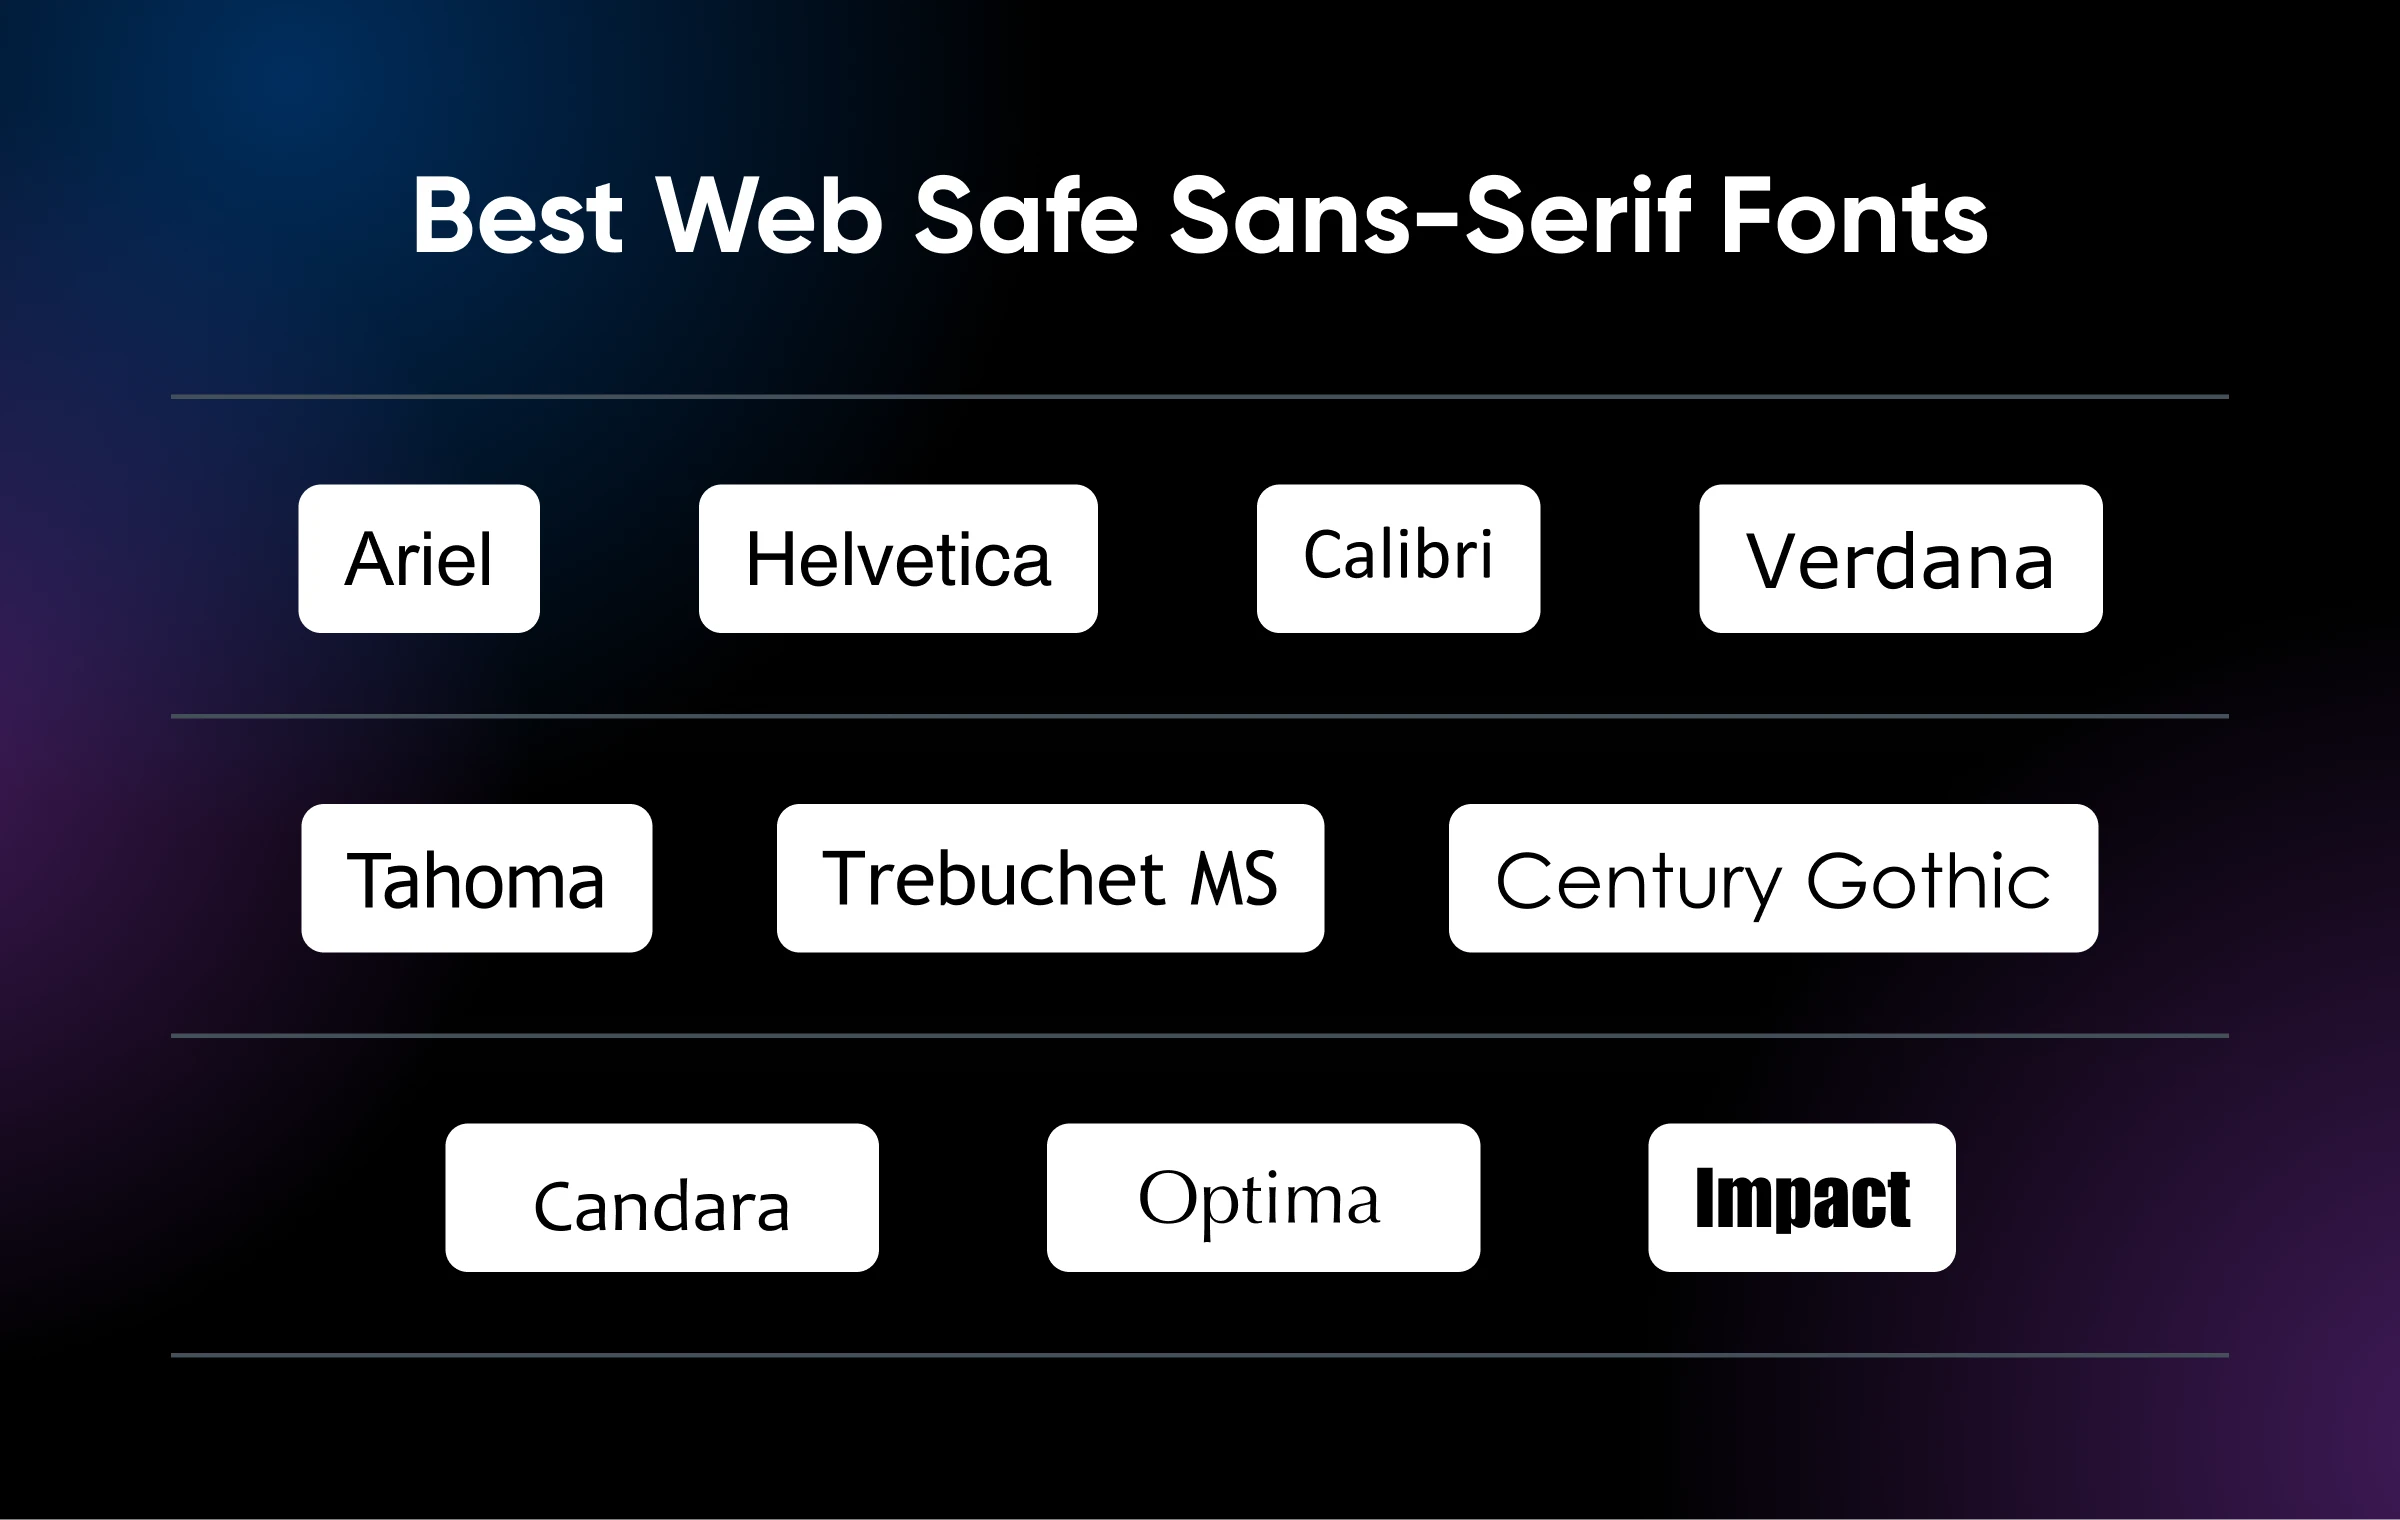 Infographic of best web safe sans-serif fonts including Arial, Helvetica, Calibri, and others. Dark gradient background.